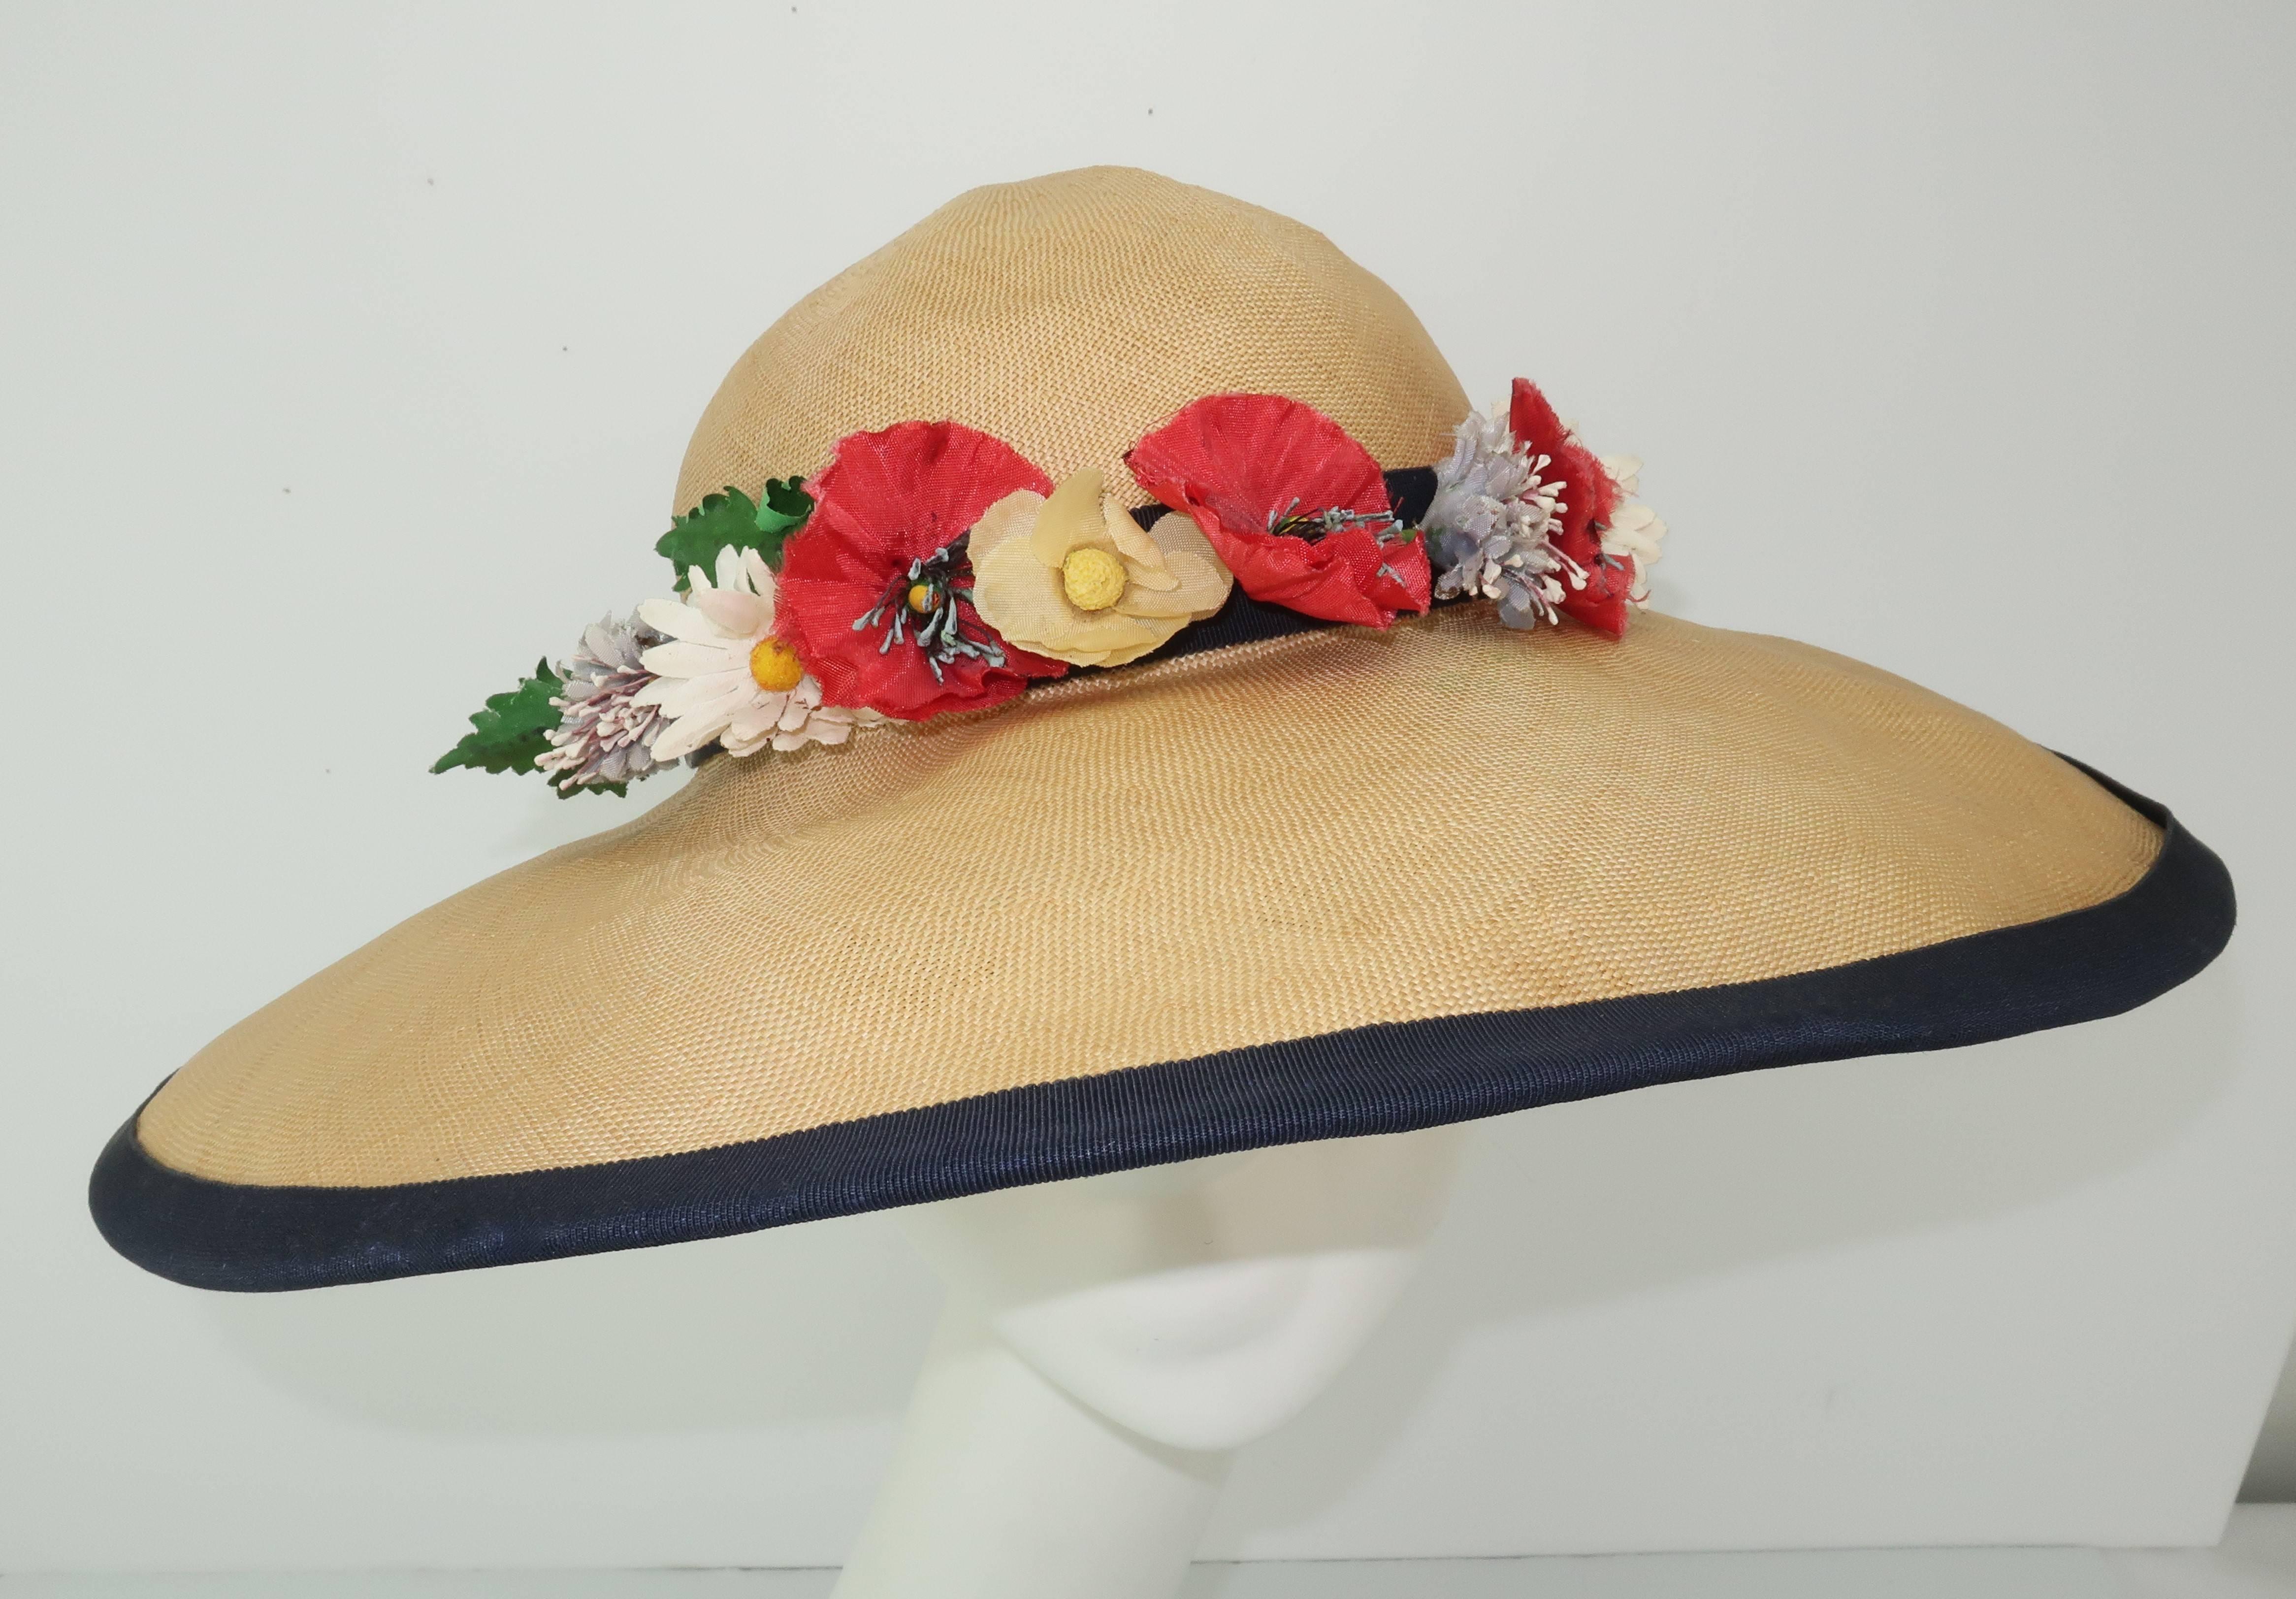 Garden party anyone?  This C.1950 wide brimmed natural straw hat by Christine Original is edged in navy blue grosgrain ribbon and decorated with a bouquet of colorful silk flowers including shades of poppy red and daisy white mixed with pale blue,